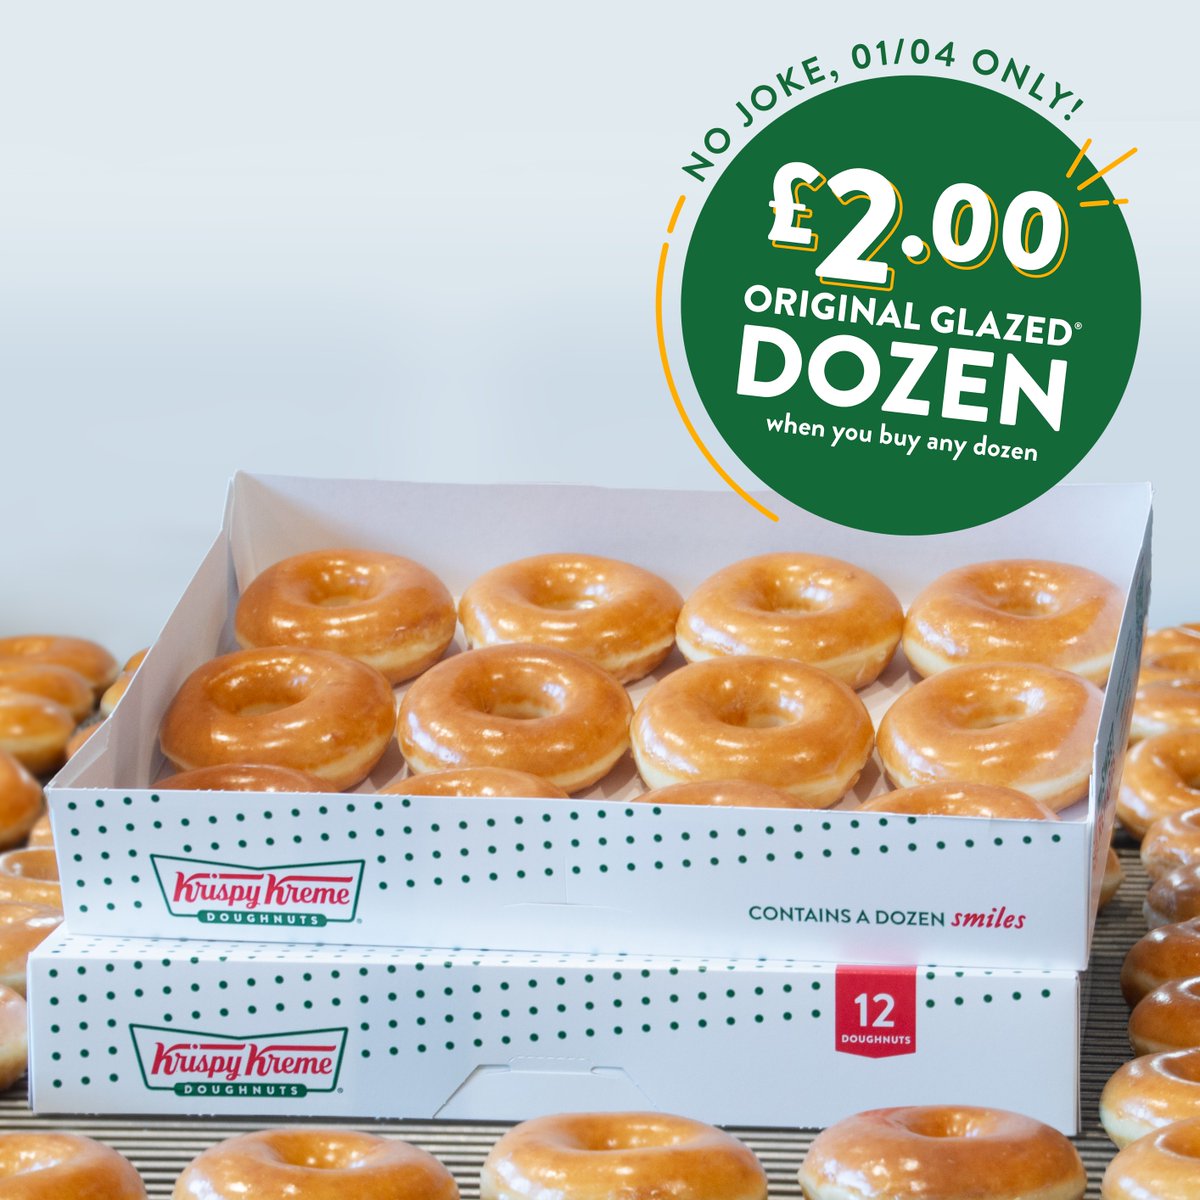 We've had our fun but this is no joke! Today only, get an Original Glazed dozen for only £2.00 when you buy any dozen! Hurry before it's too late. ⏰ T&Cs apply. Offer available exclusively at Krispy Kreme shop locations only.